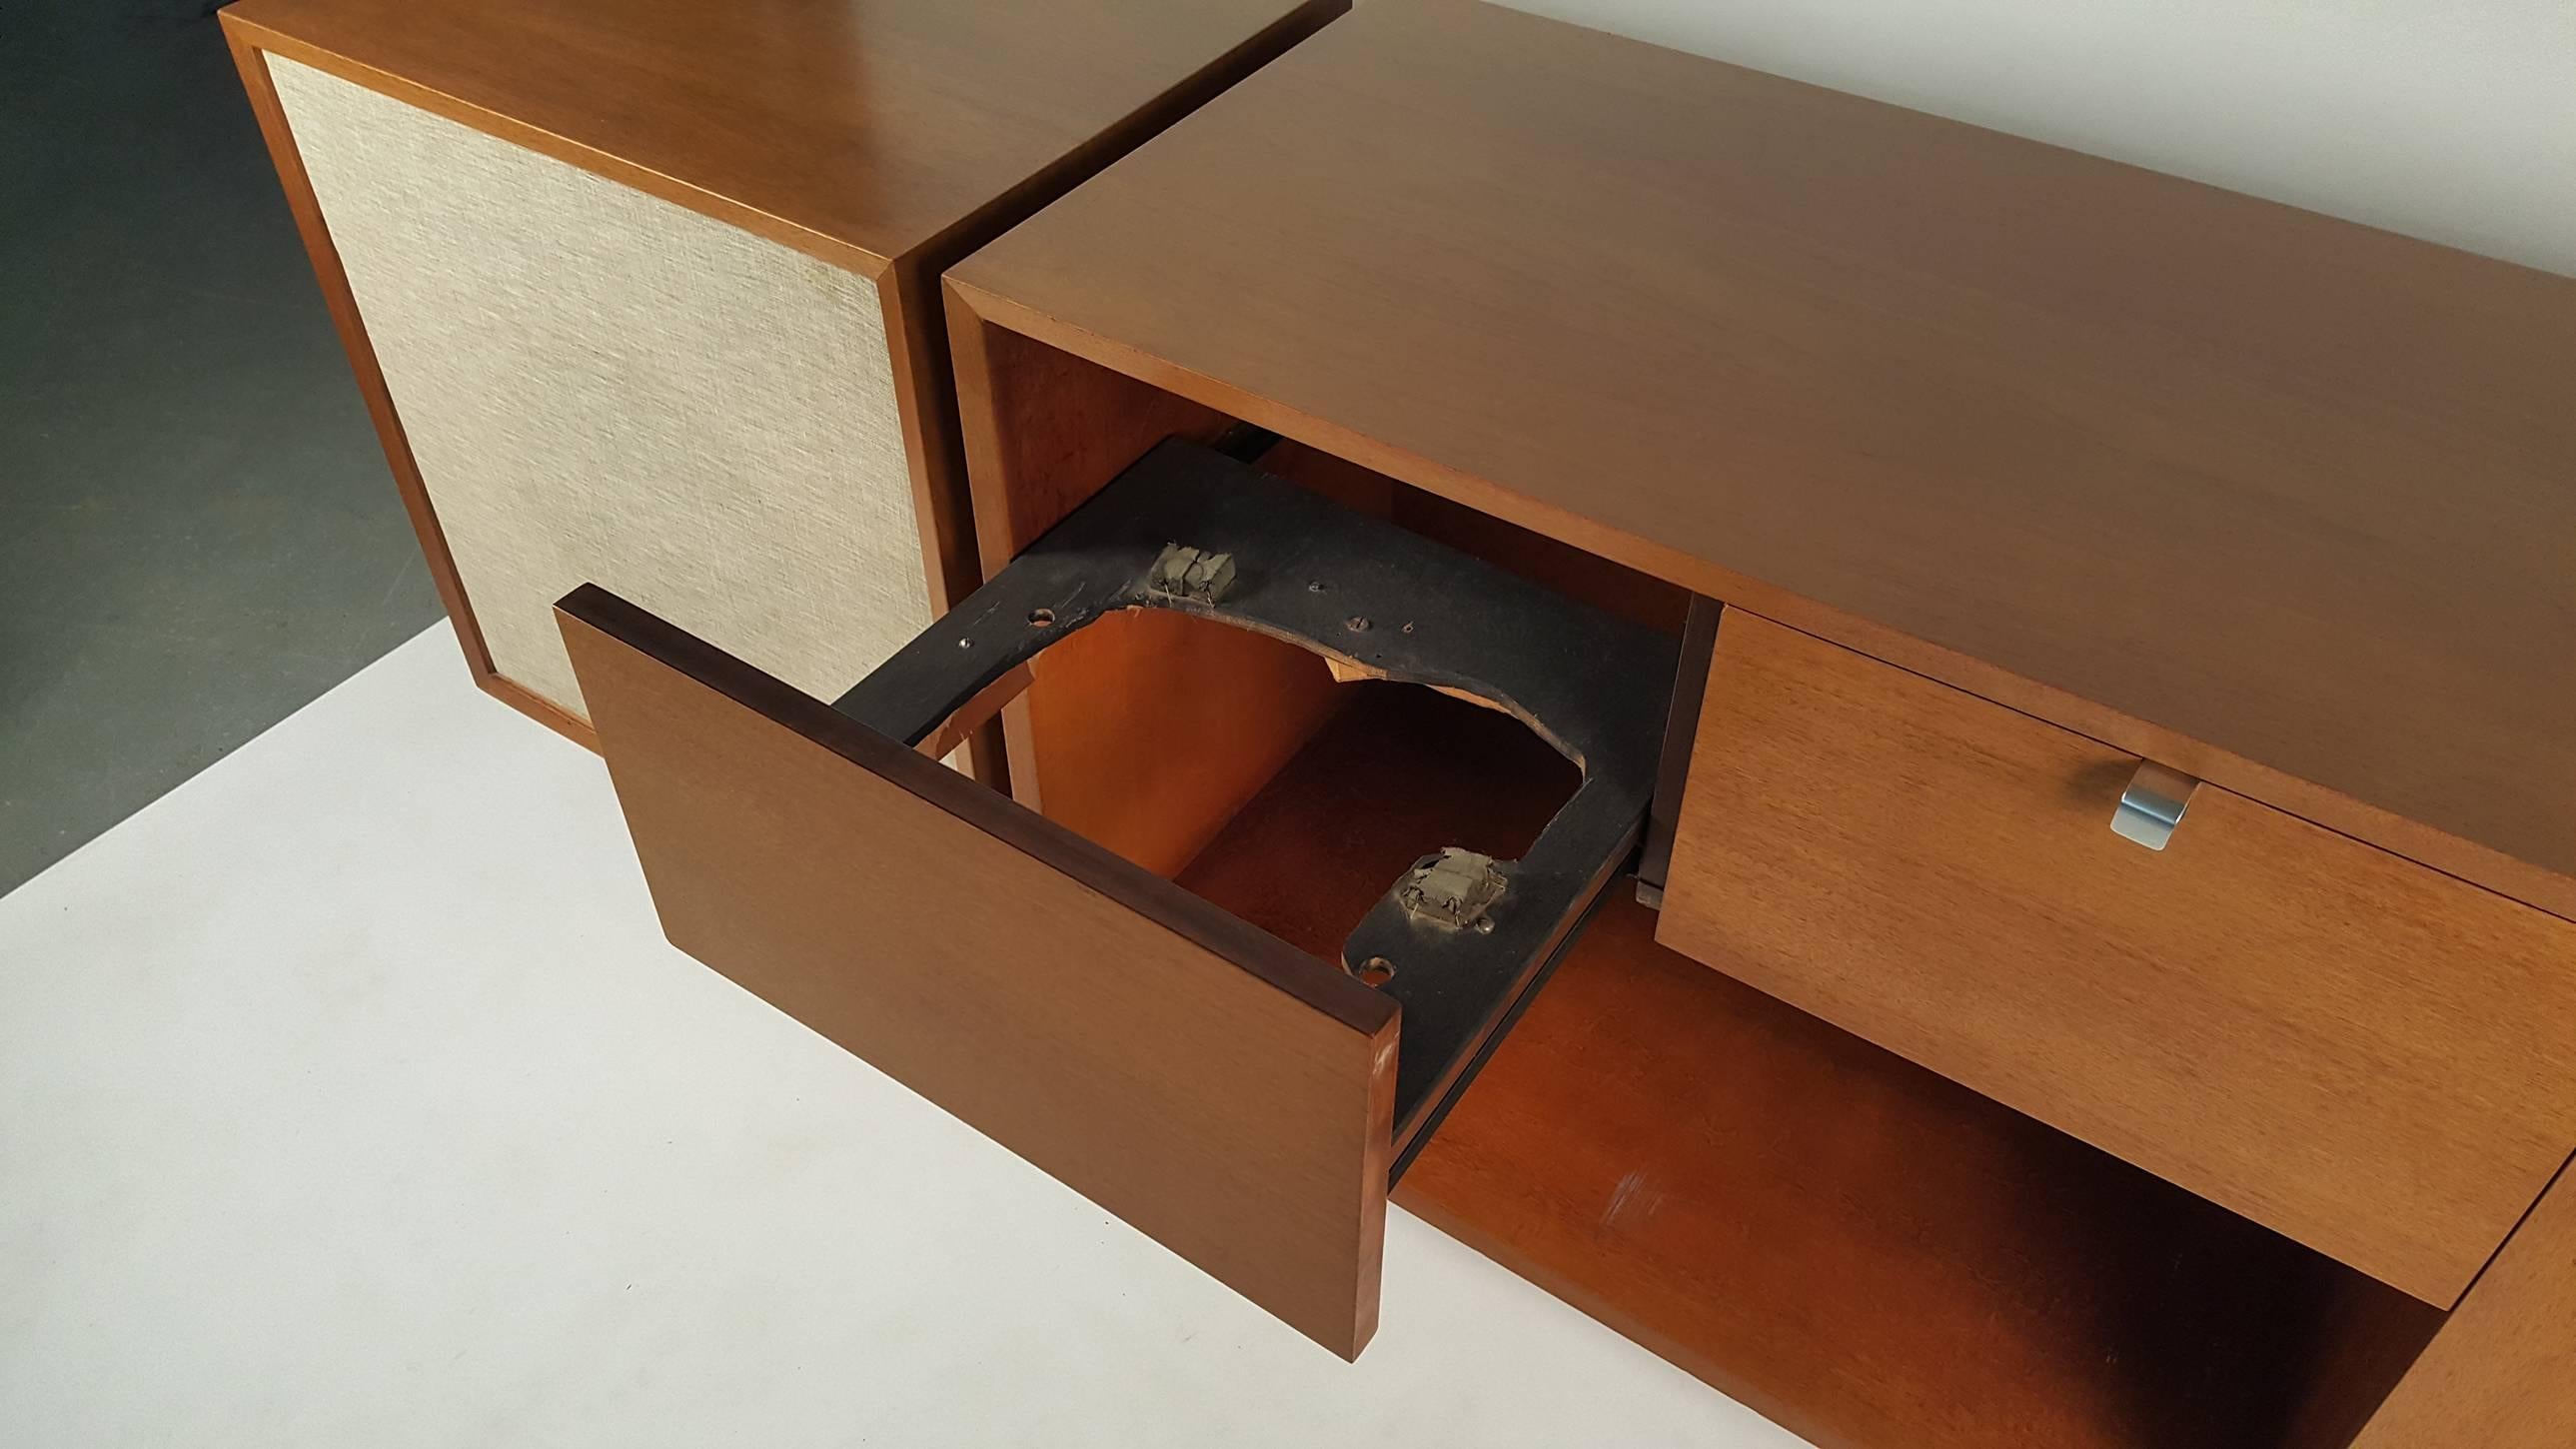 1950s George Nelson Stereo cabinet for Herman Miller with rare satellite speaker option. University speakers included. Ready to add your favorite turntable and receiver. Stereo cabinet measures 56.25 w x 18.5